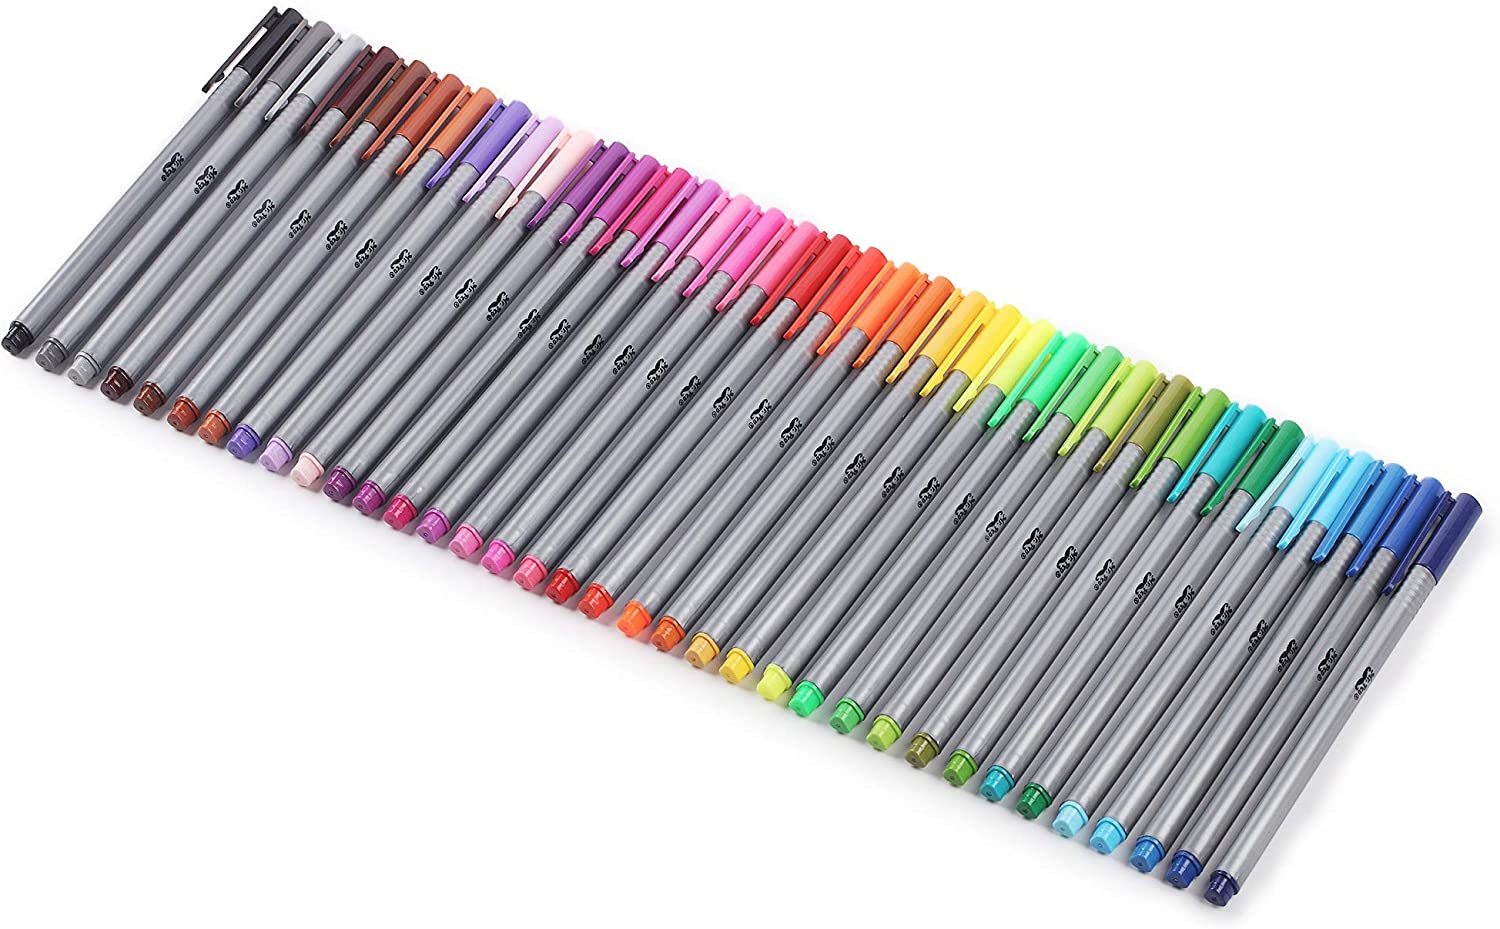 36 Pack Fineliner Pens - The CEO Creative